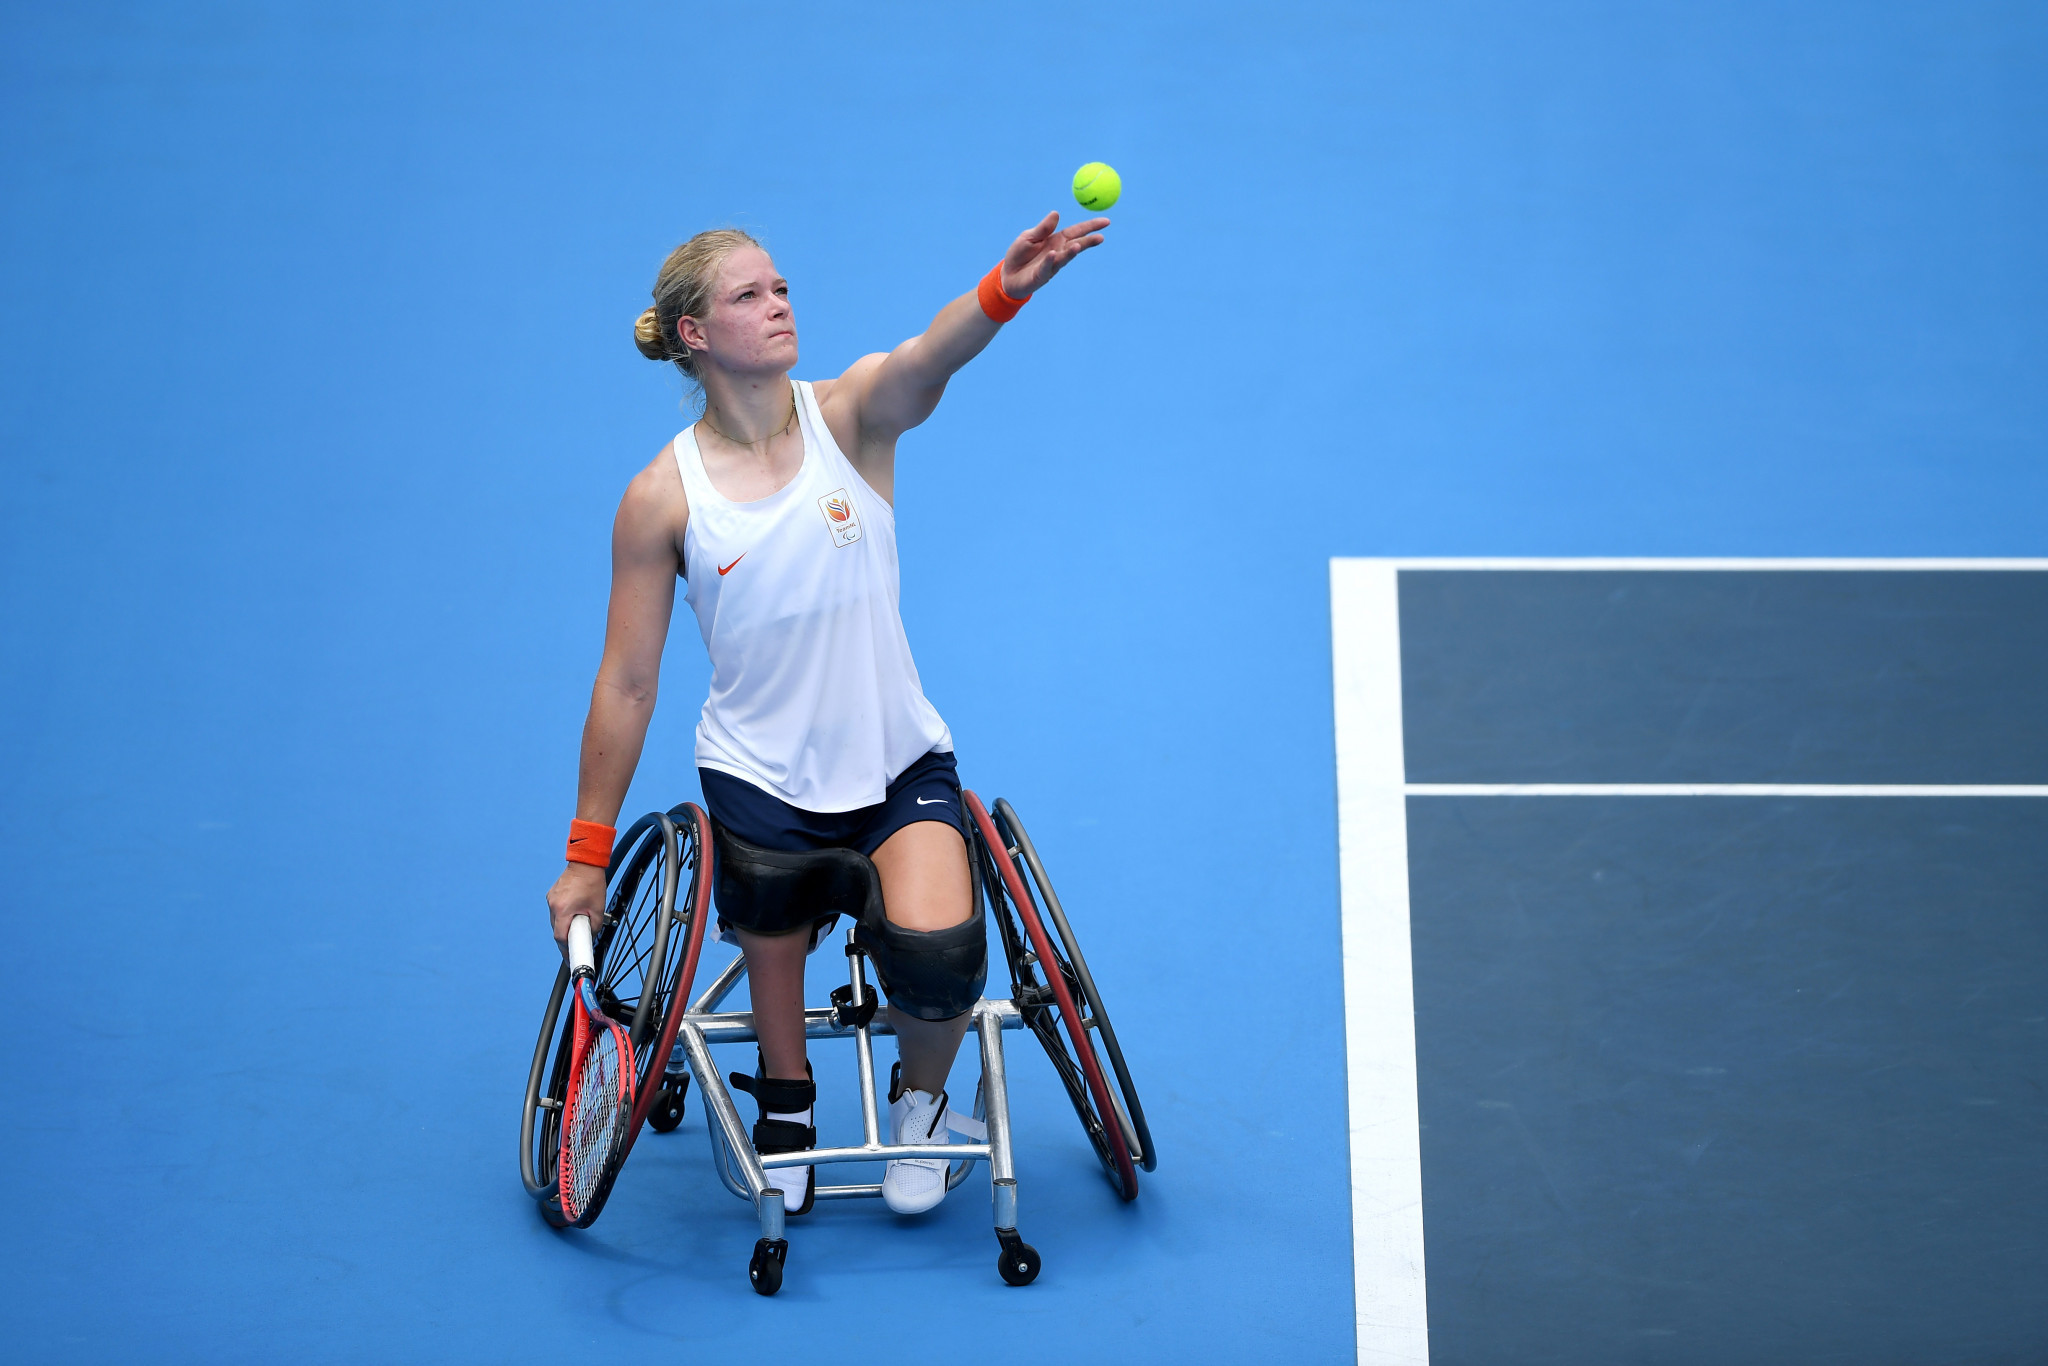 Diede de Groot has won the past three US Open women's singles titles ©Getty Images